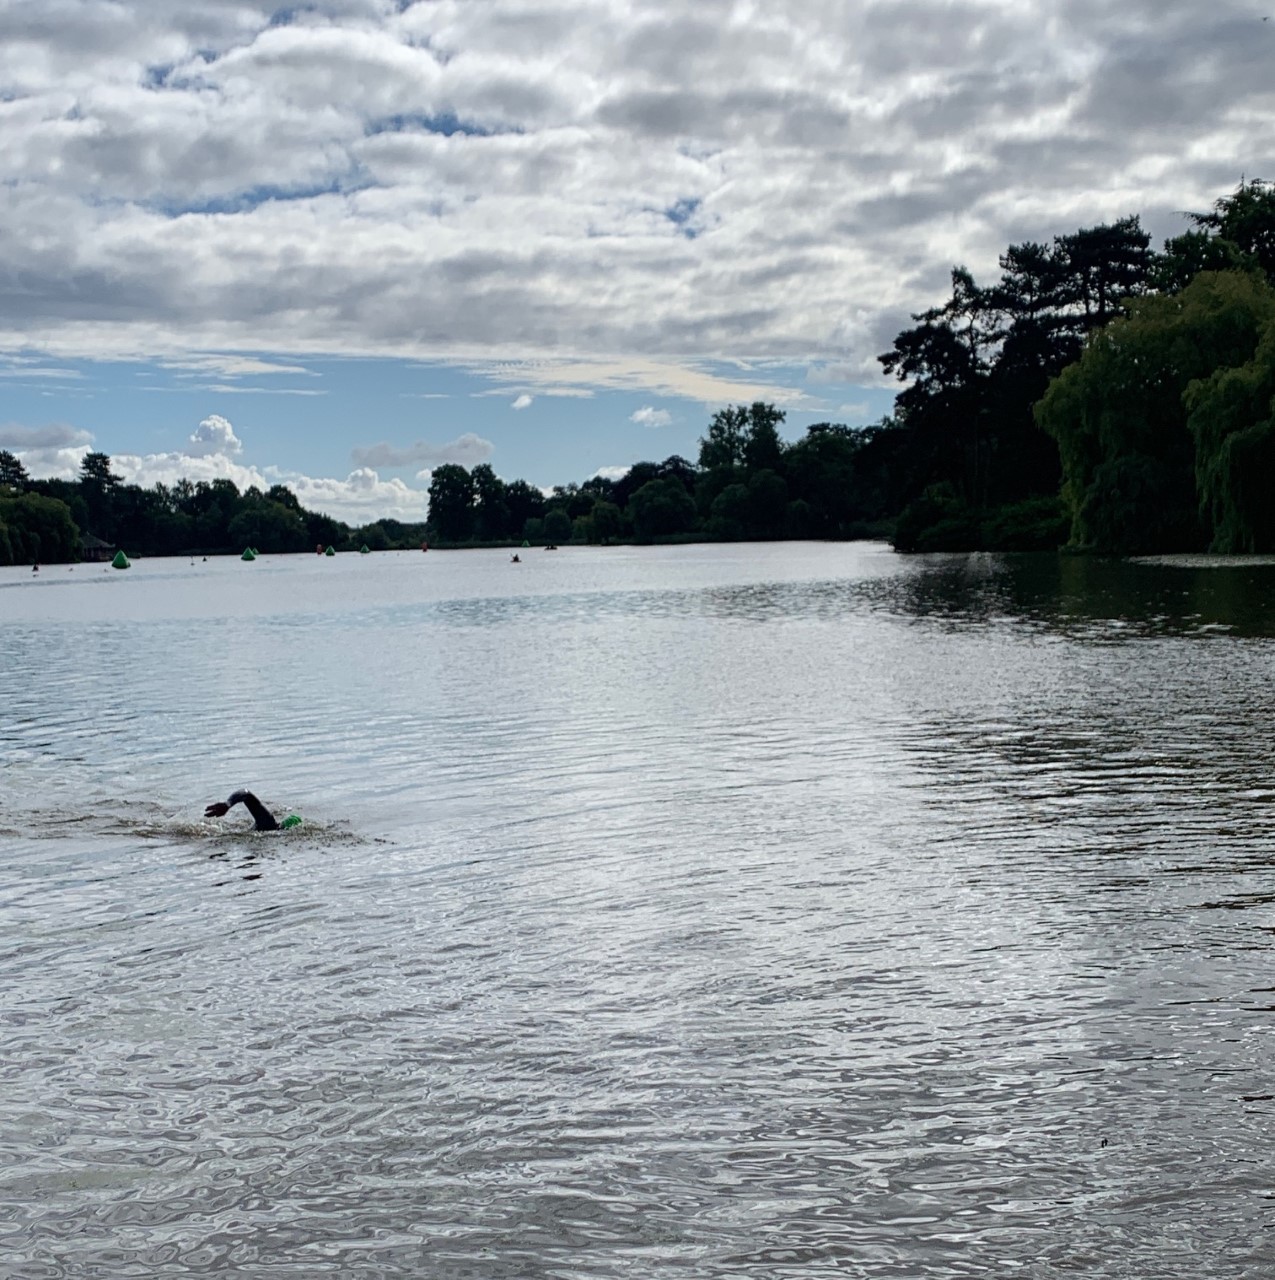 Army Swimmimg Union – Open Water Swimming Squad compete at the Hever Castle Festival of Endurance